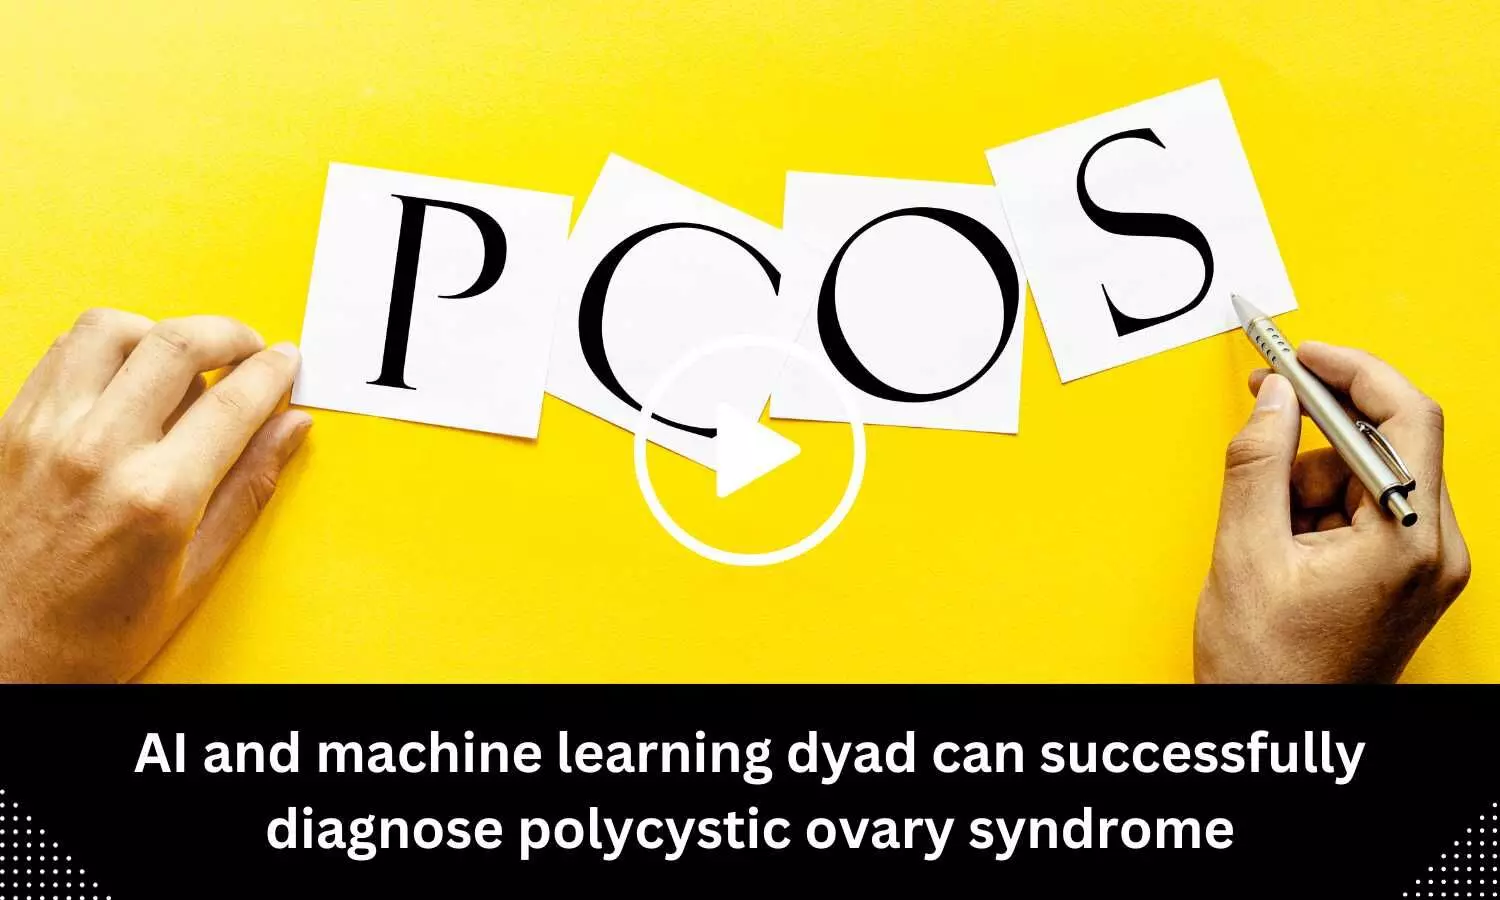 AI and machine learning dyad can successfully diagnose polycystic ovary syndrome